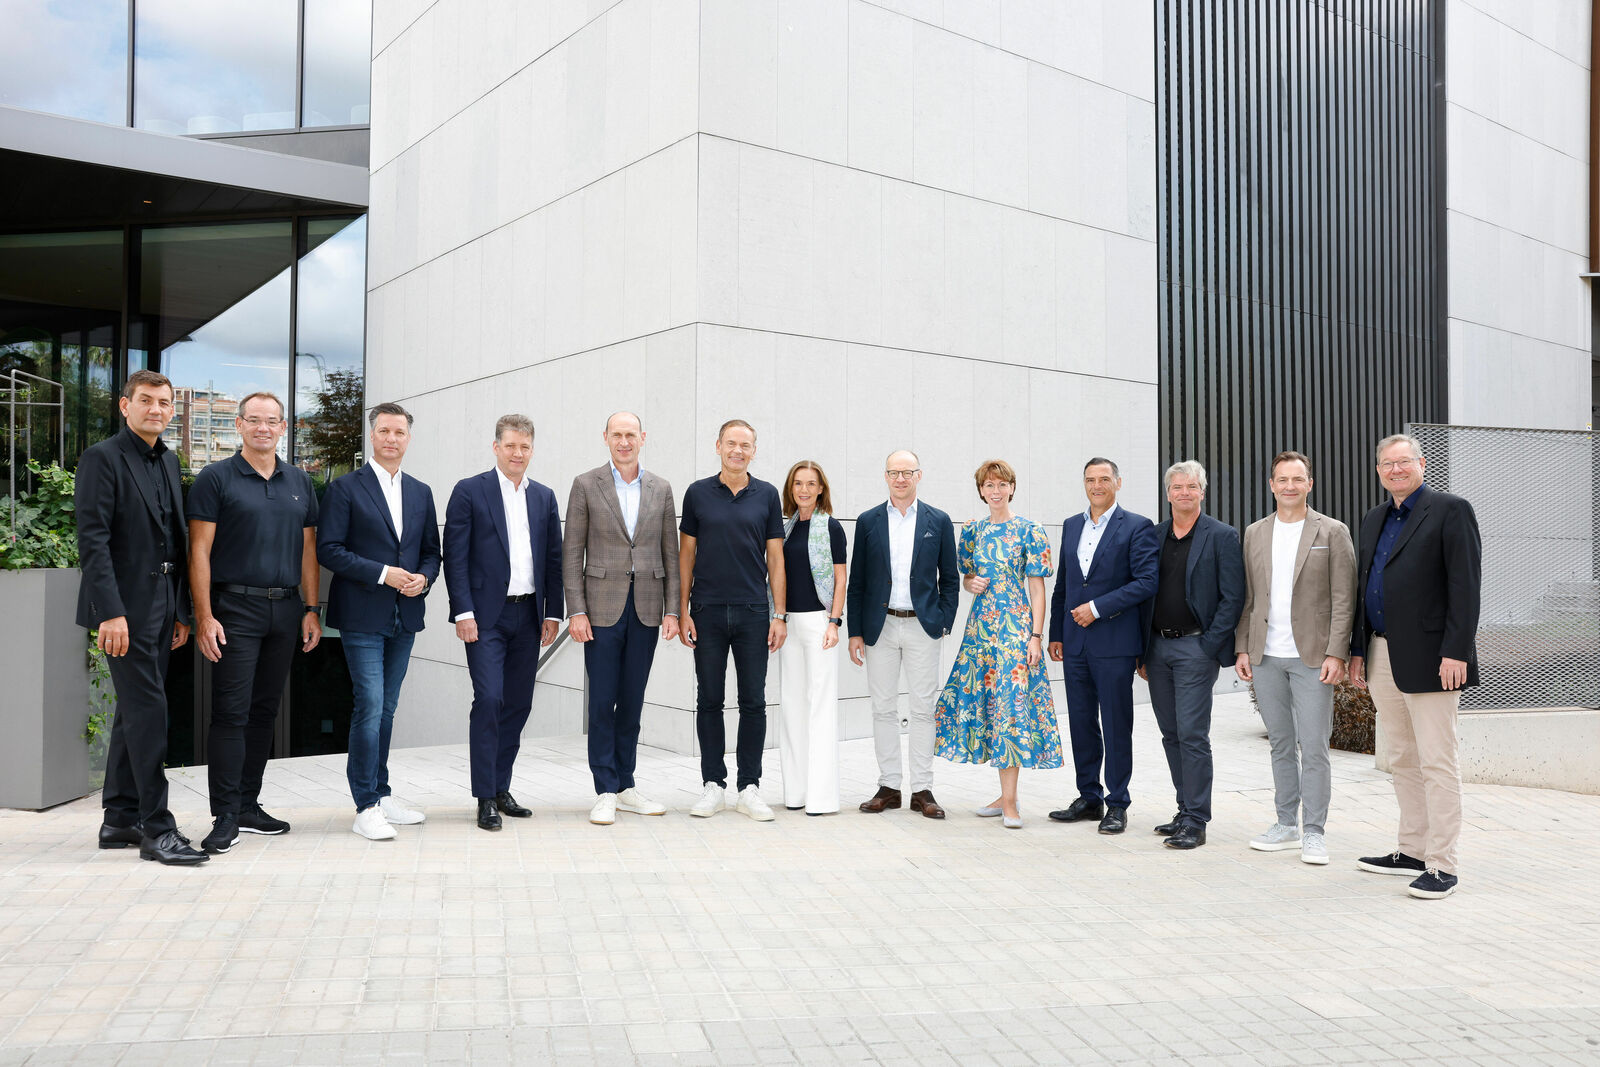 Extended Board of Management of the Volkswagen Group: group of people standing side by side in front of a building